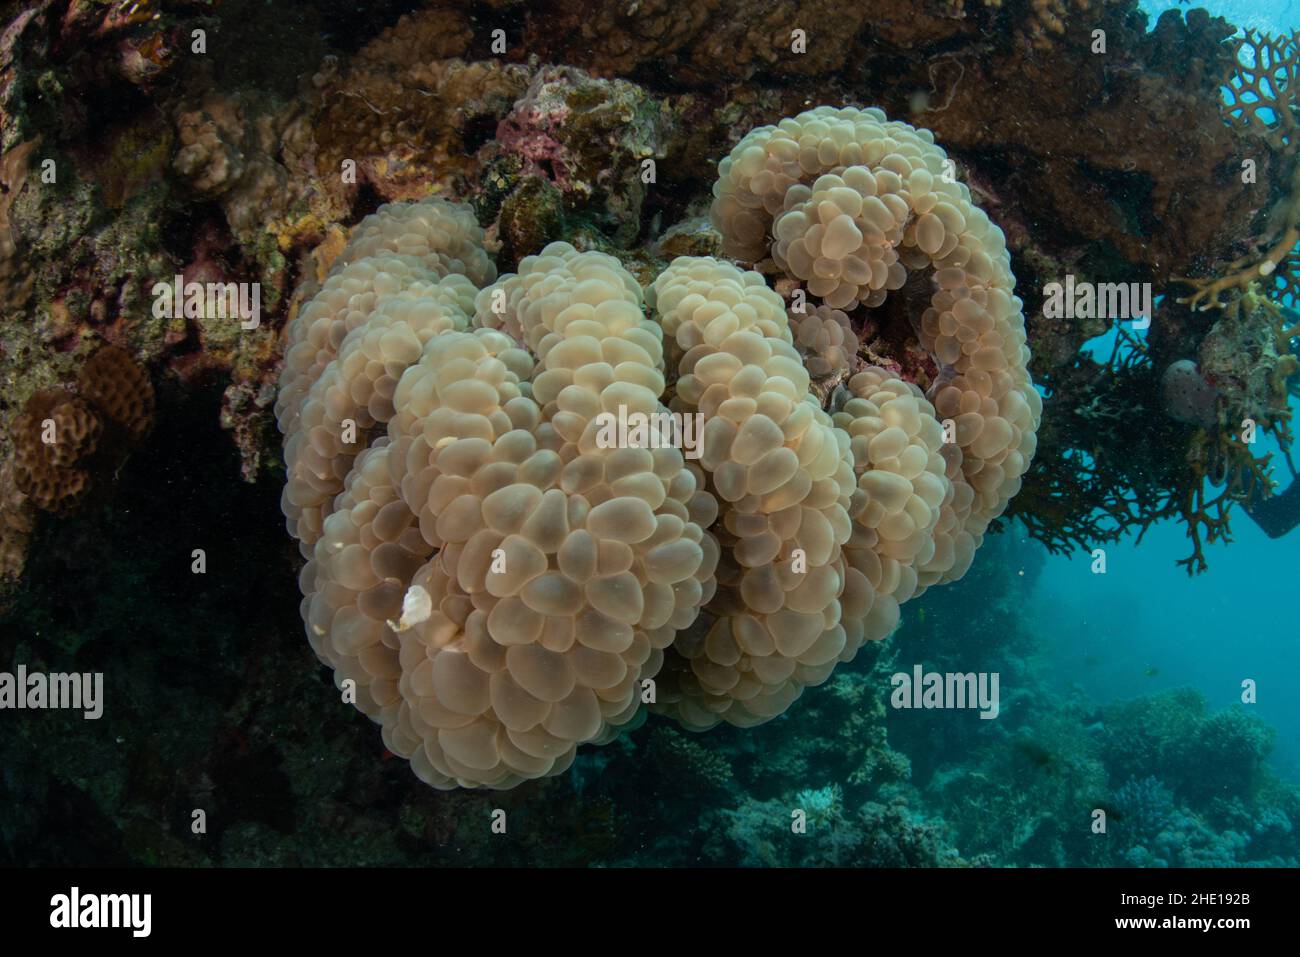 Bubble coral (Plerogyra sinuosa) on the reef in the red sea off the coast of Hurghada, Egypt. Stock Photo